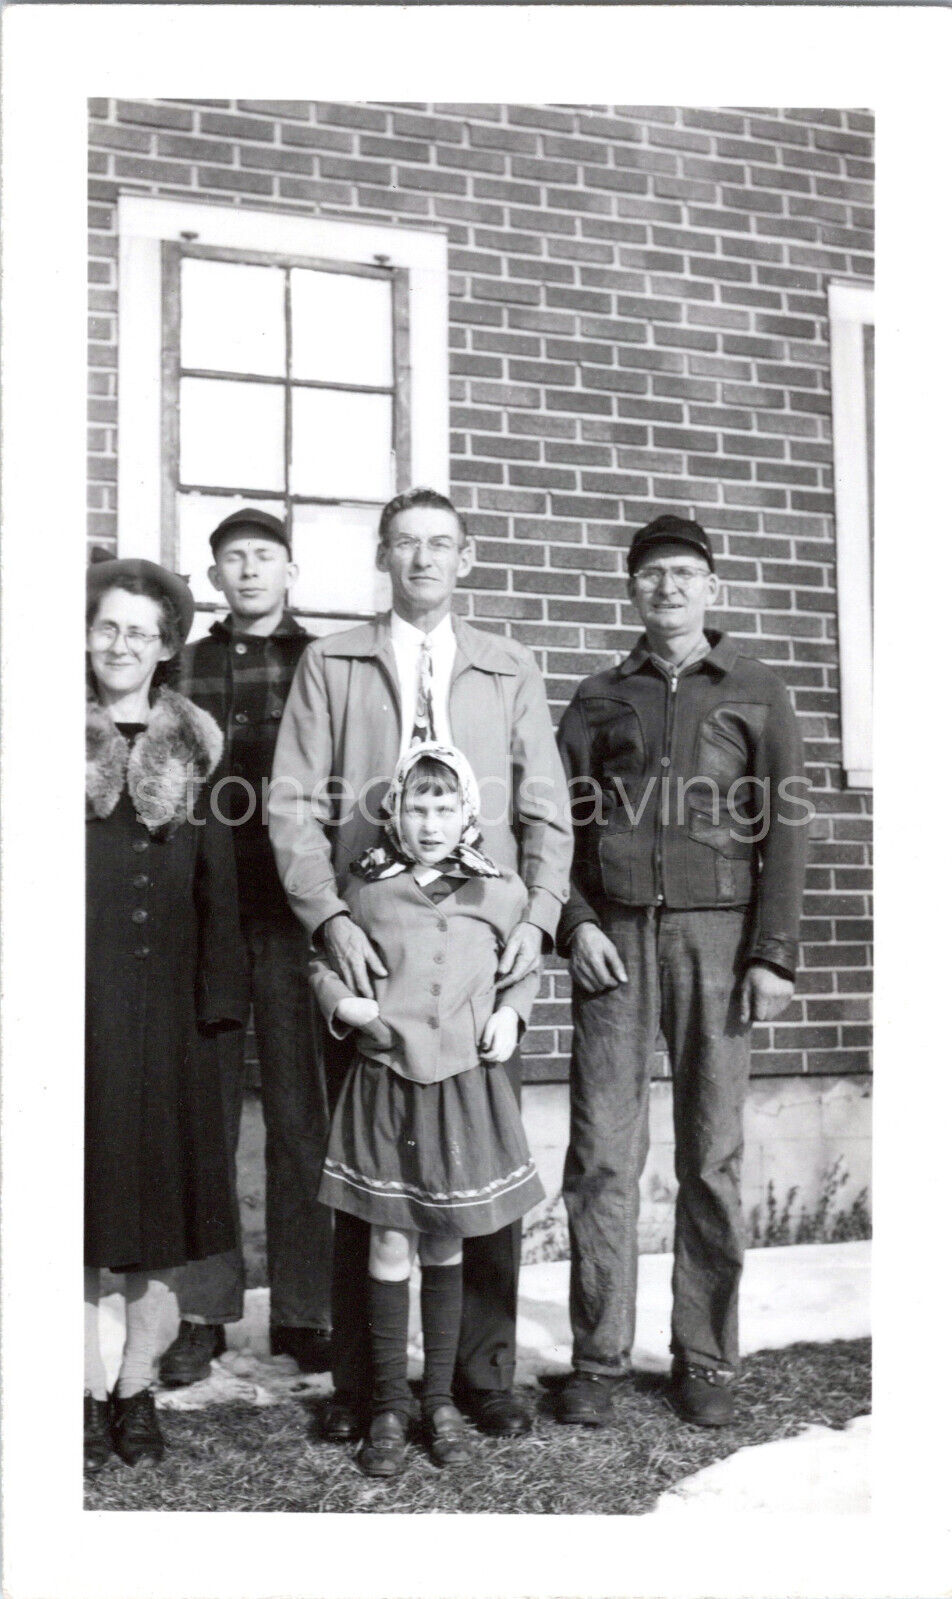 VTG B&W Found Photo - 40s 50s - Family Pose Together By Brick Wall On Winter Day